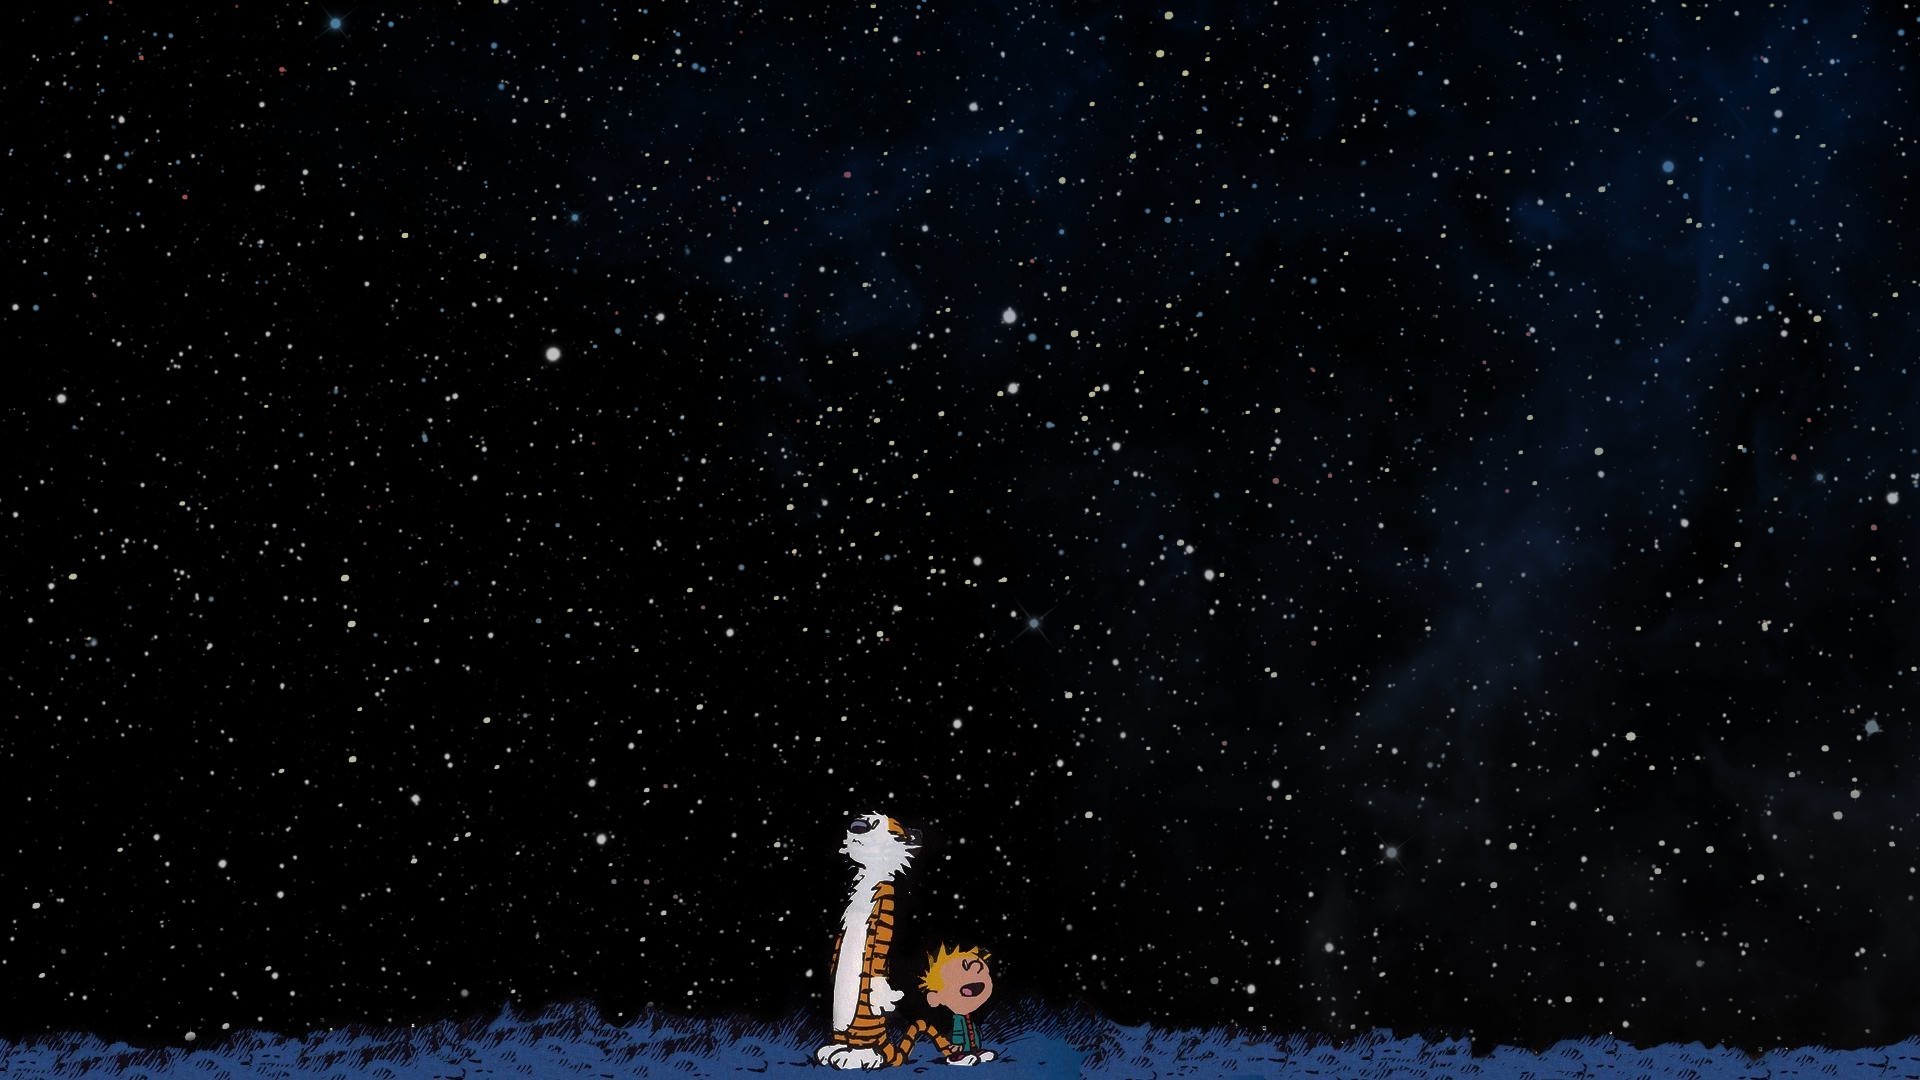 Calvin and Hobbes Stars Wallpaper (69+ images)